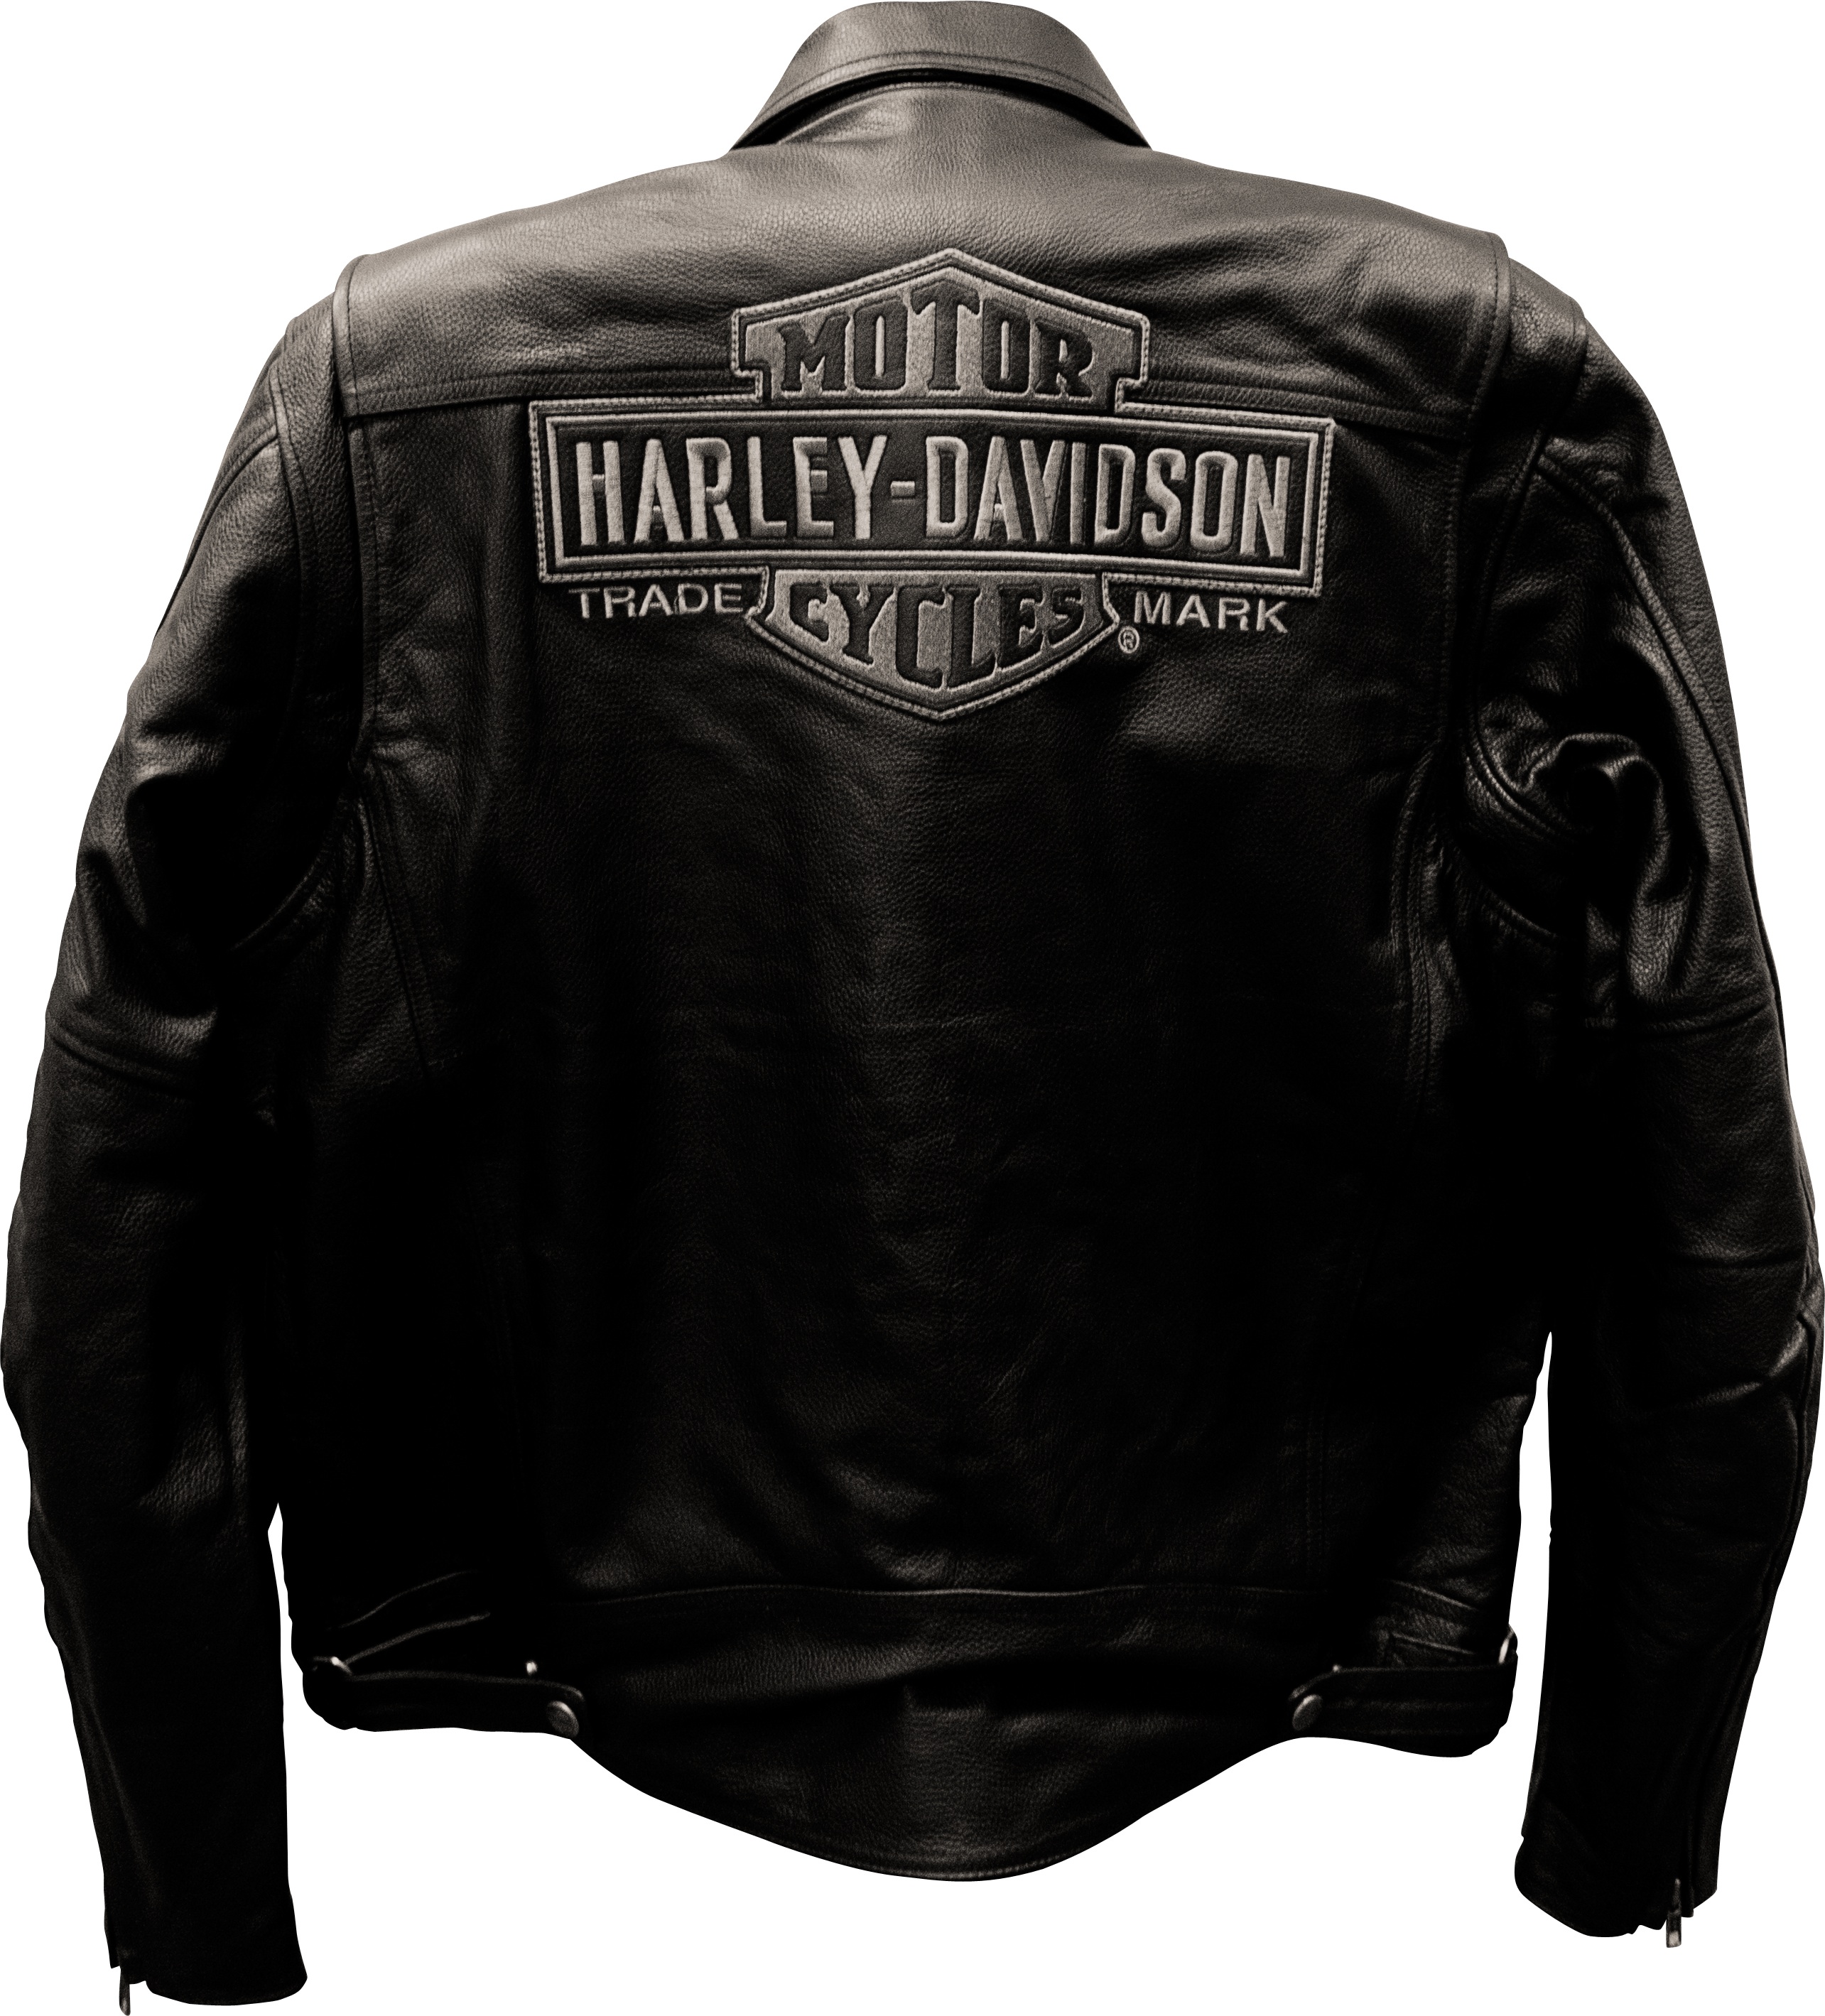 Playboy and Harley-Davidson team up for the “Ultimate Playboy Giveaway ...